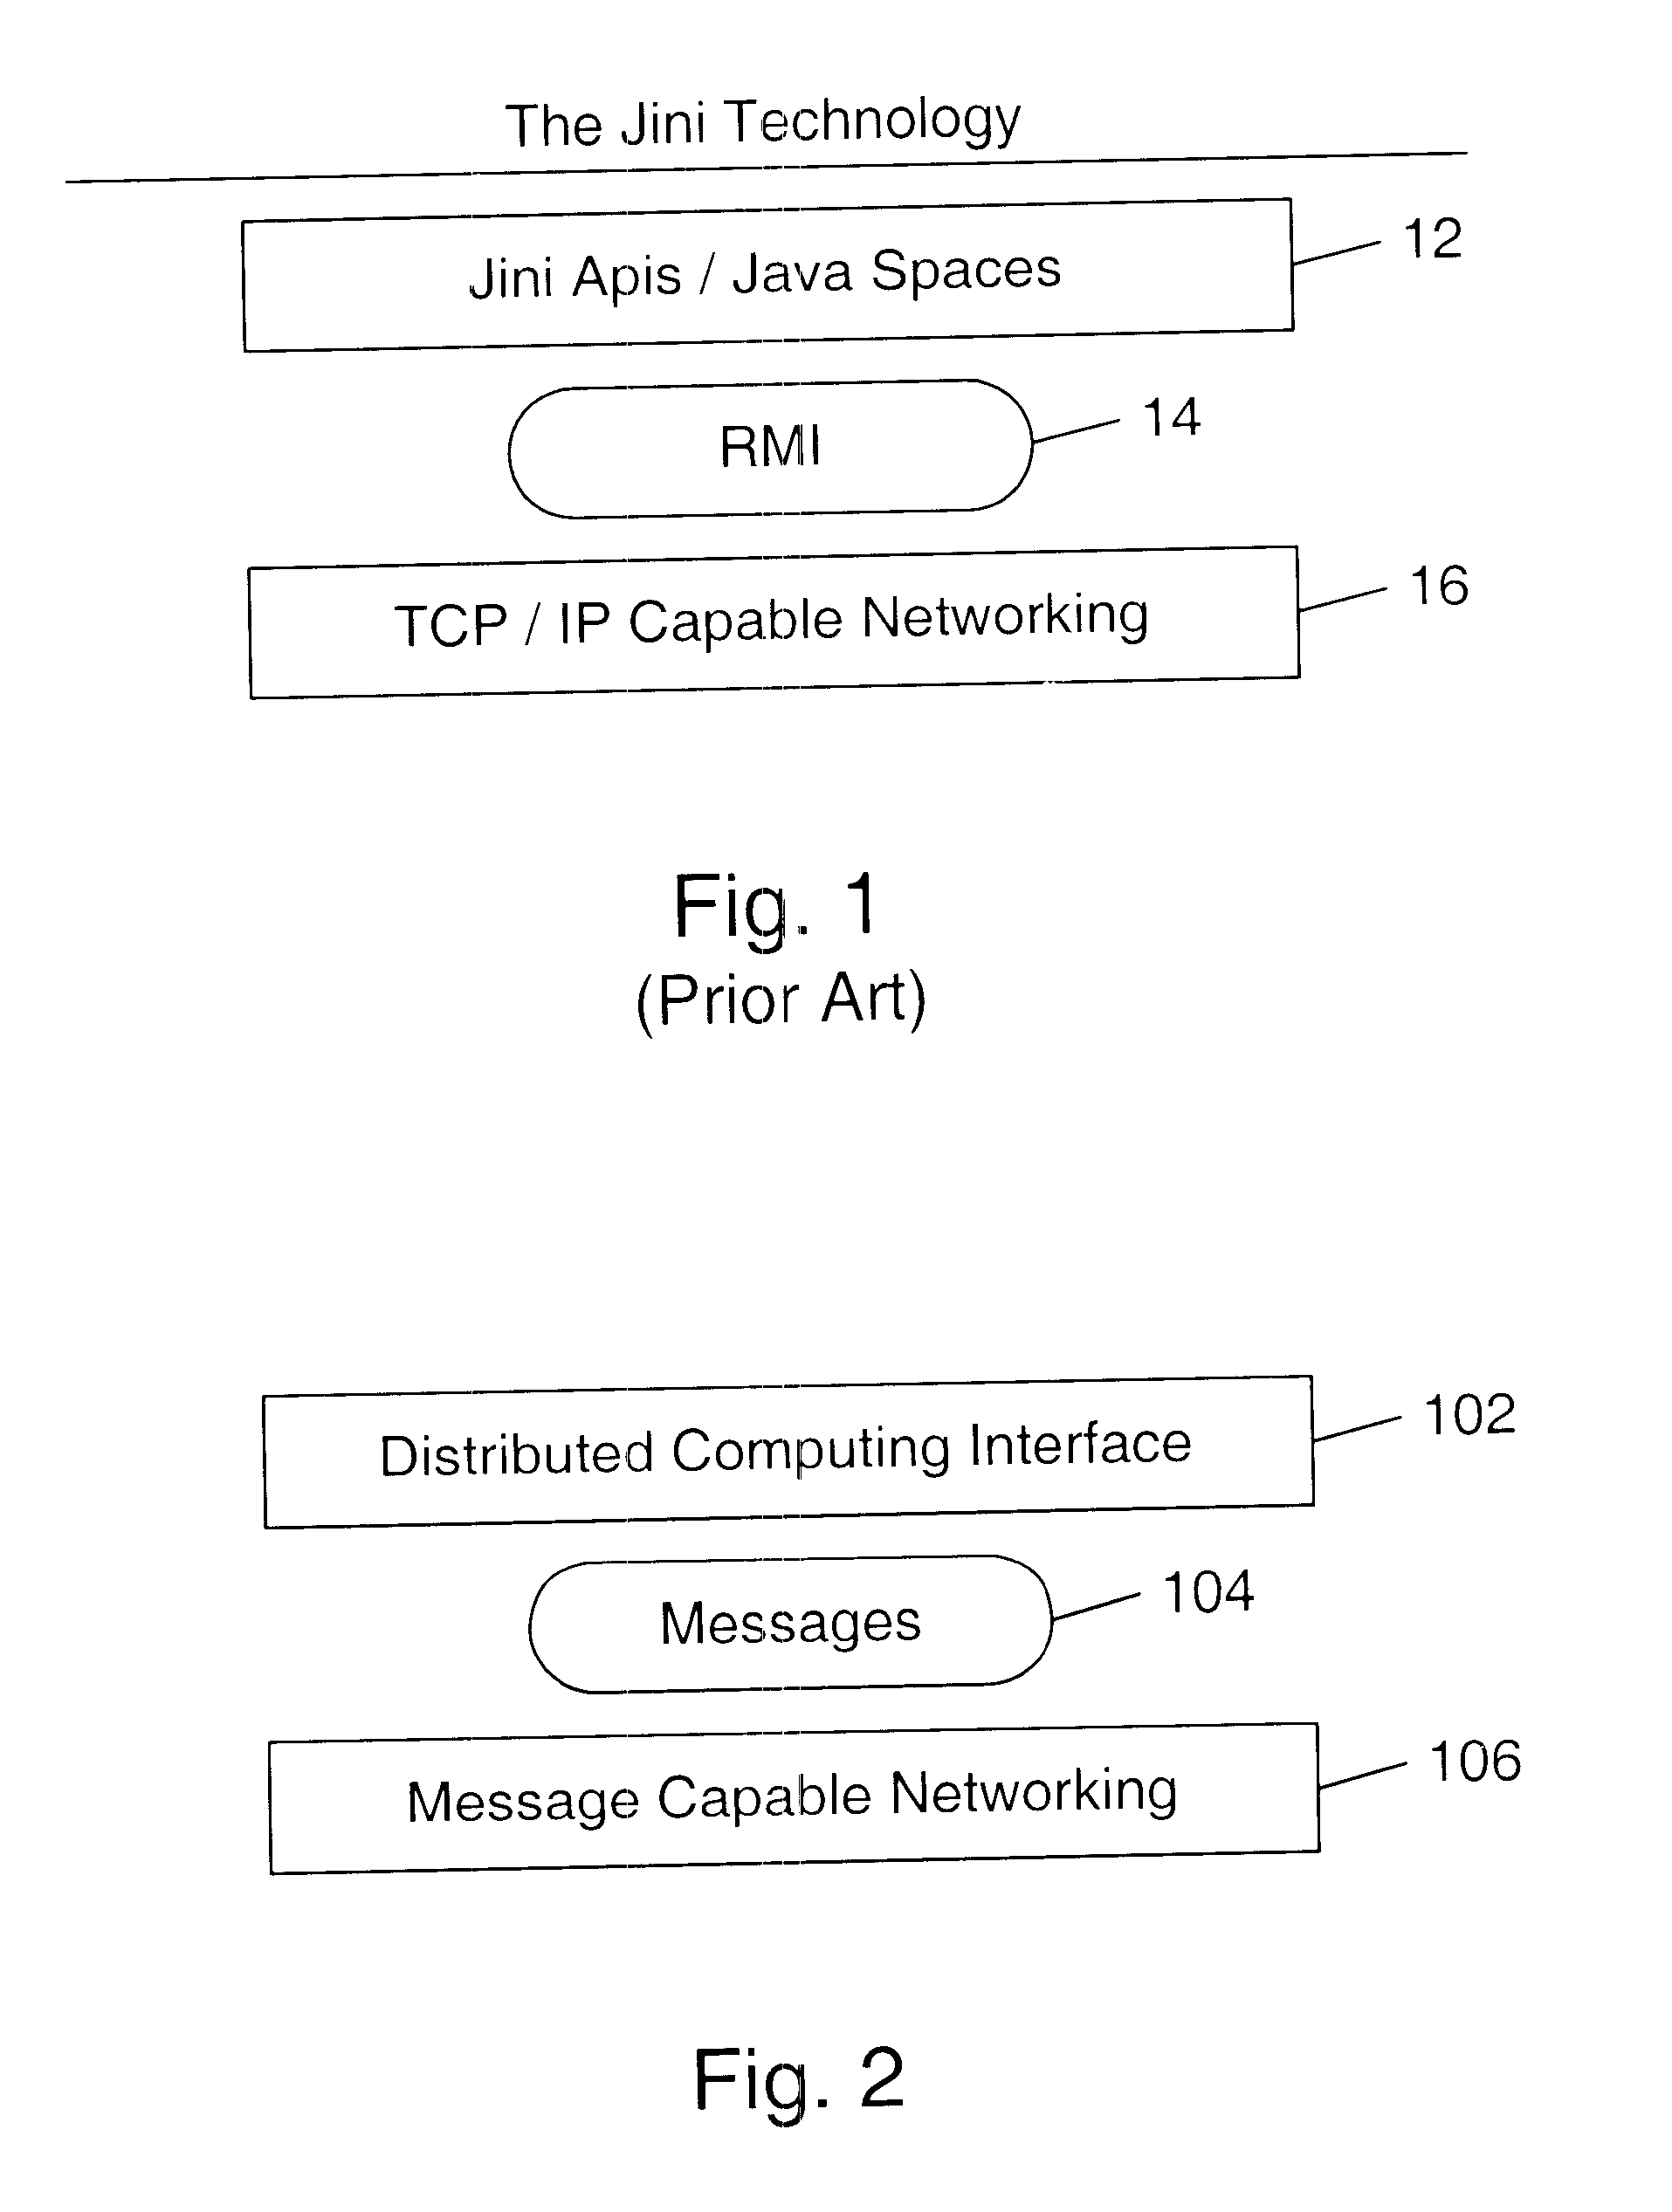 Mechanism and apparatus for web-based searching of URI-addressable repositories in a distributed computing environment